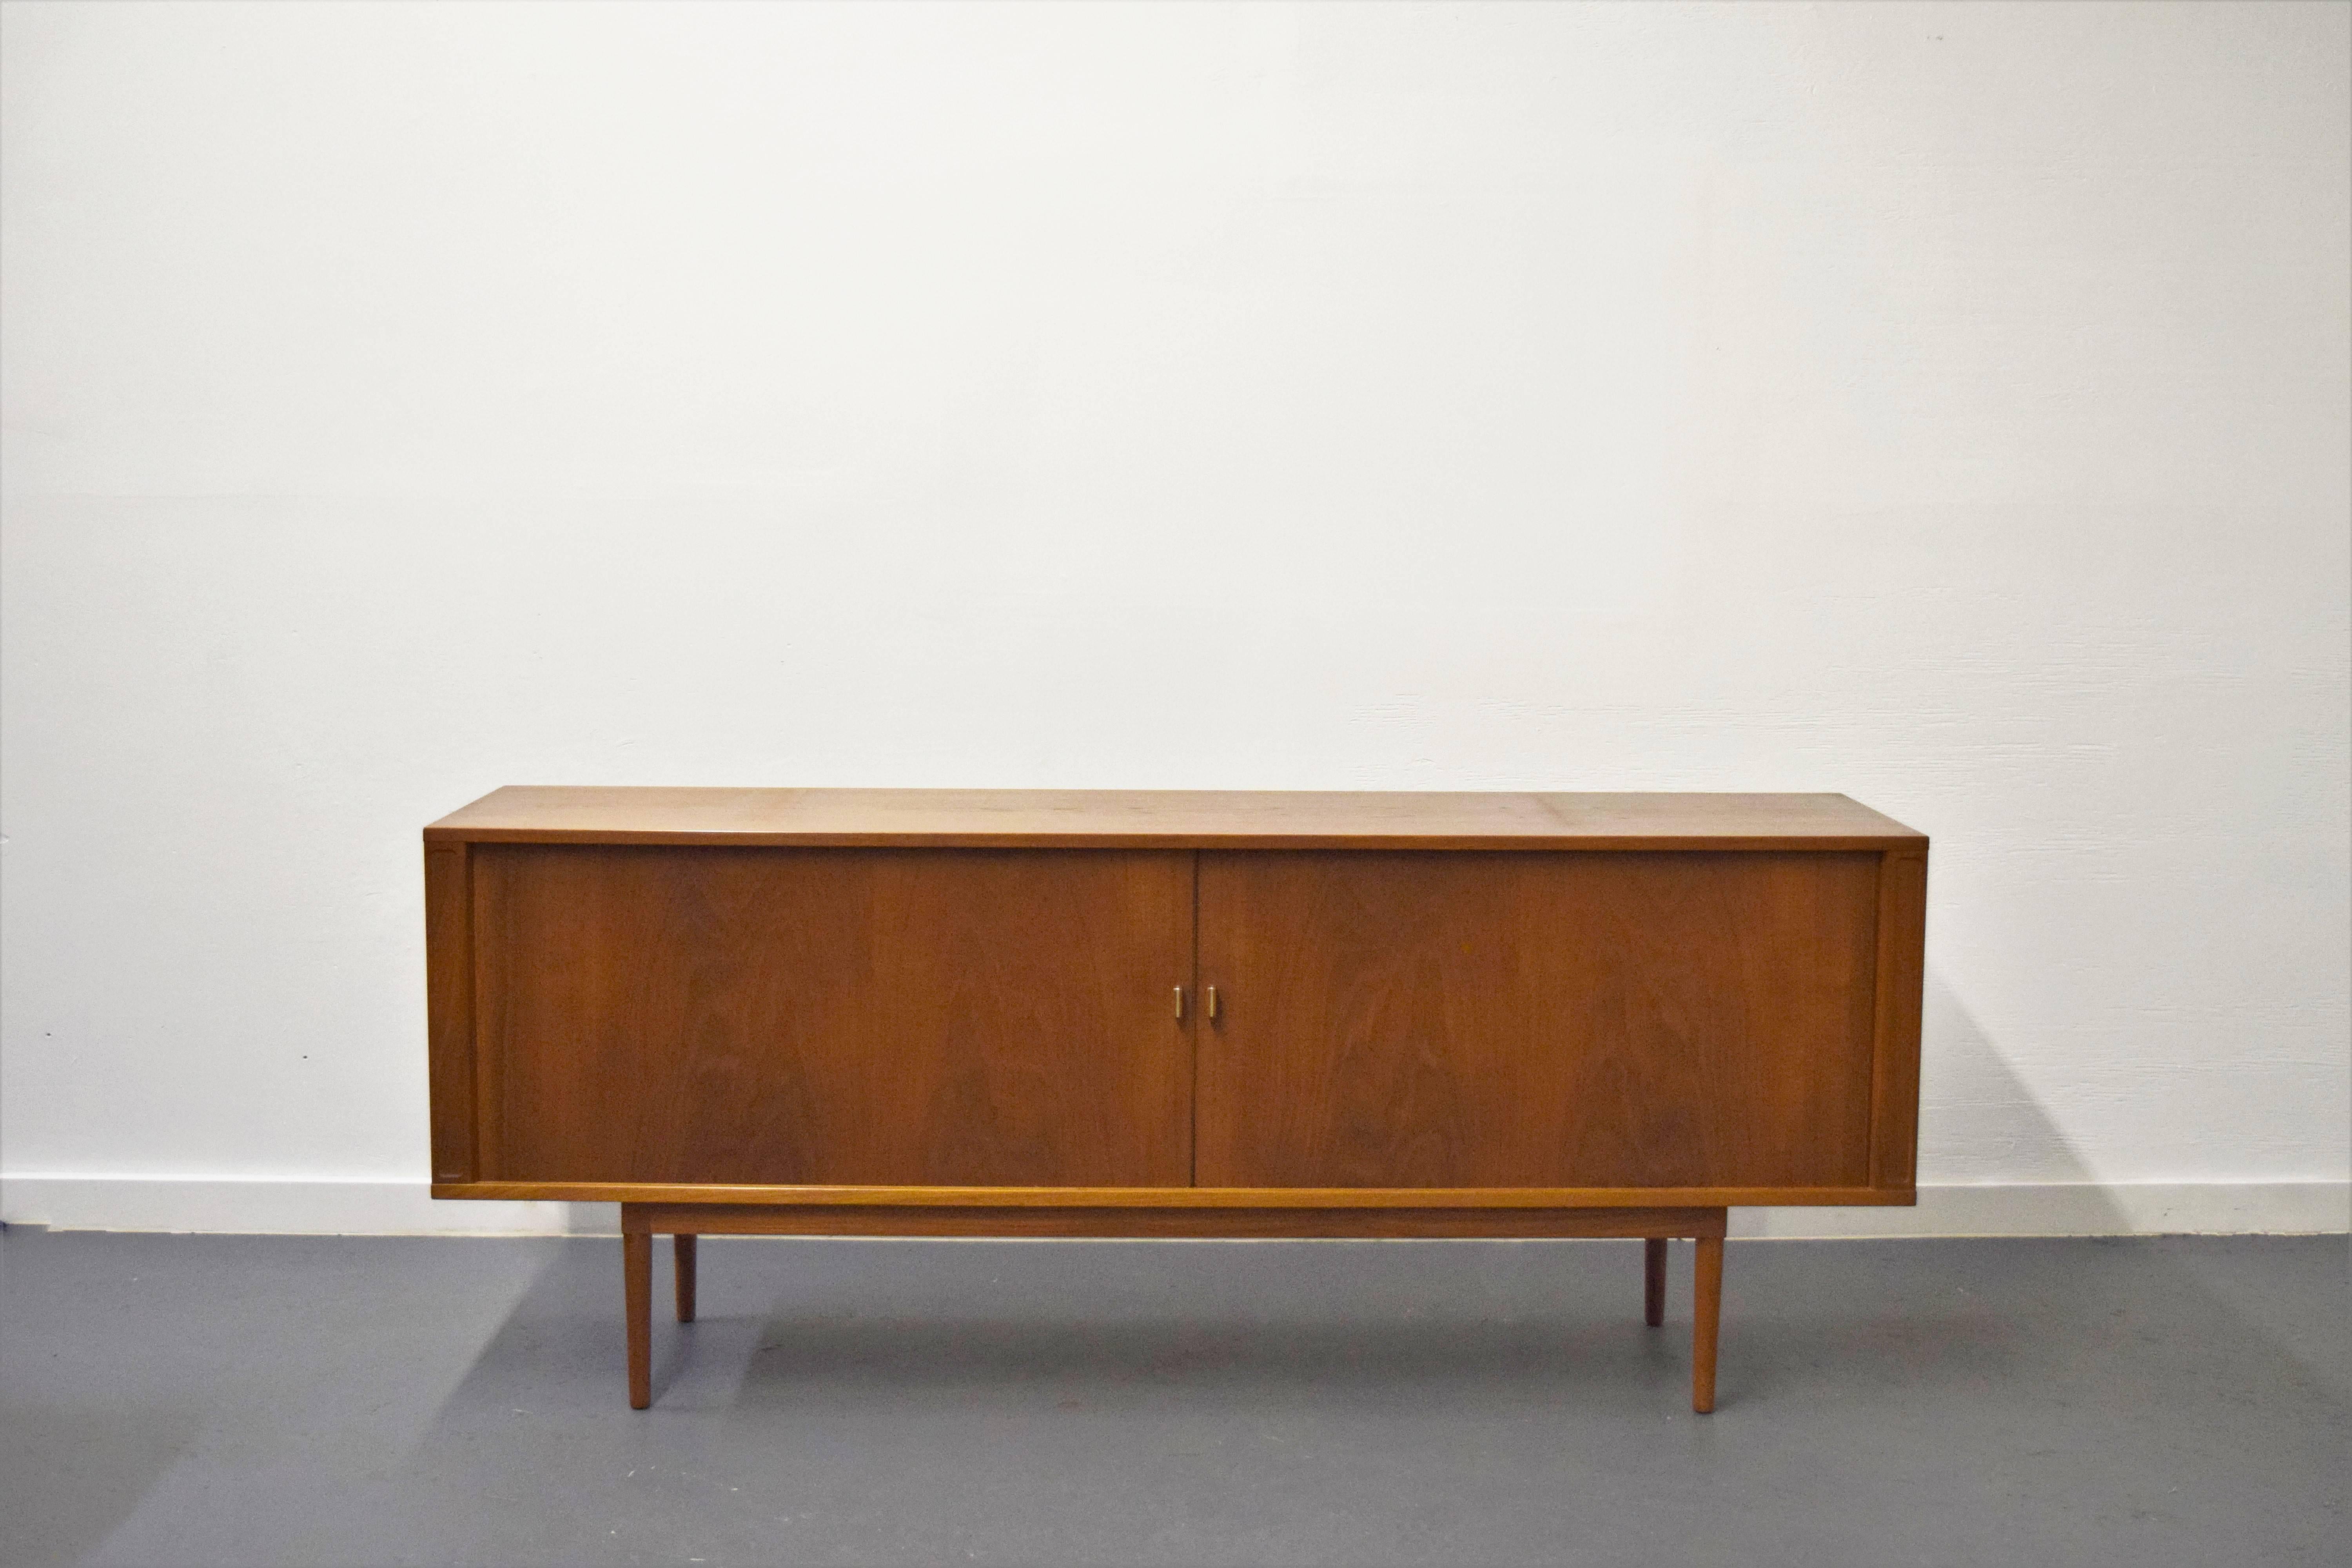 Jens H. Quistgaard tambour door credenza. Top hutch included. Height of credenza with hutch 58.25.